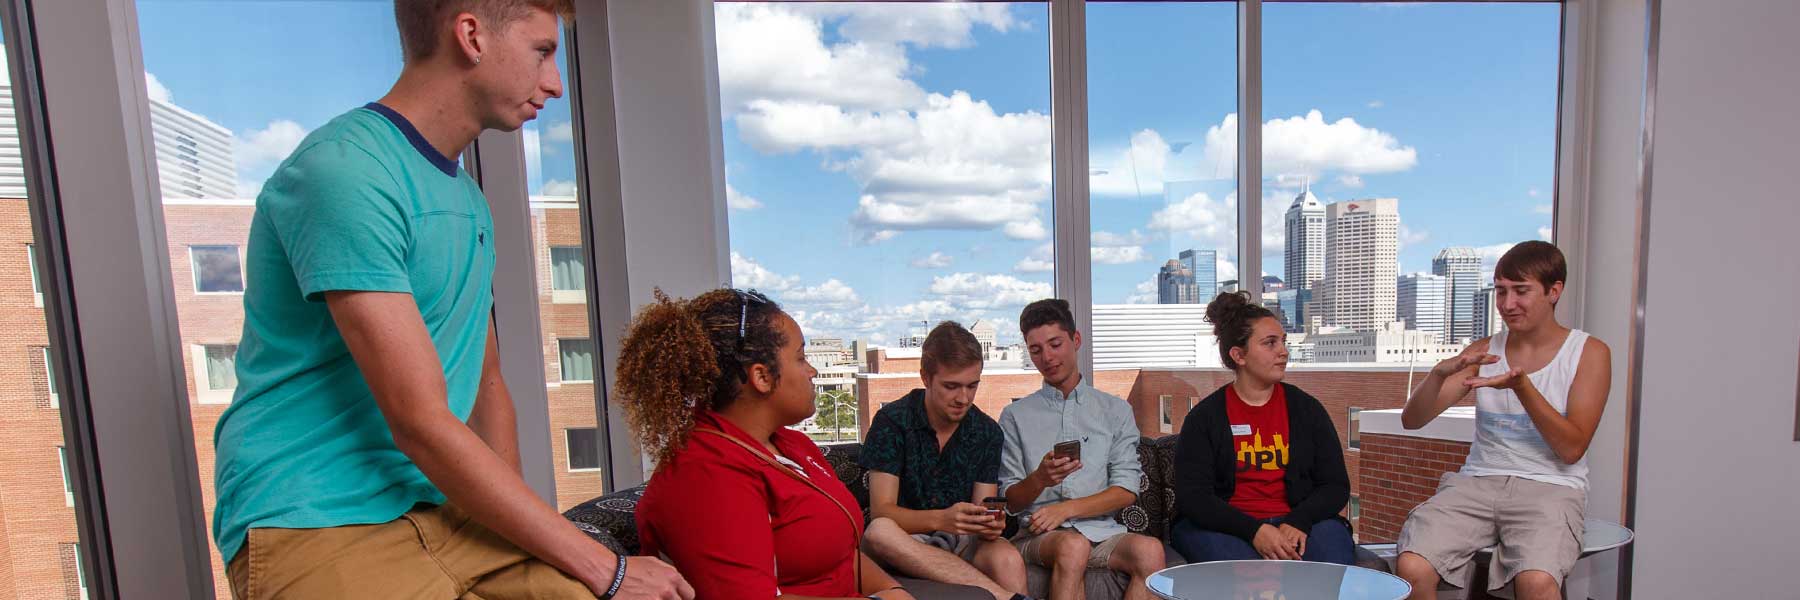 Students hang out in a room with downtown Indianapolis in the background. 